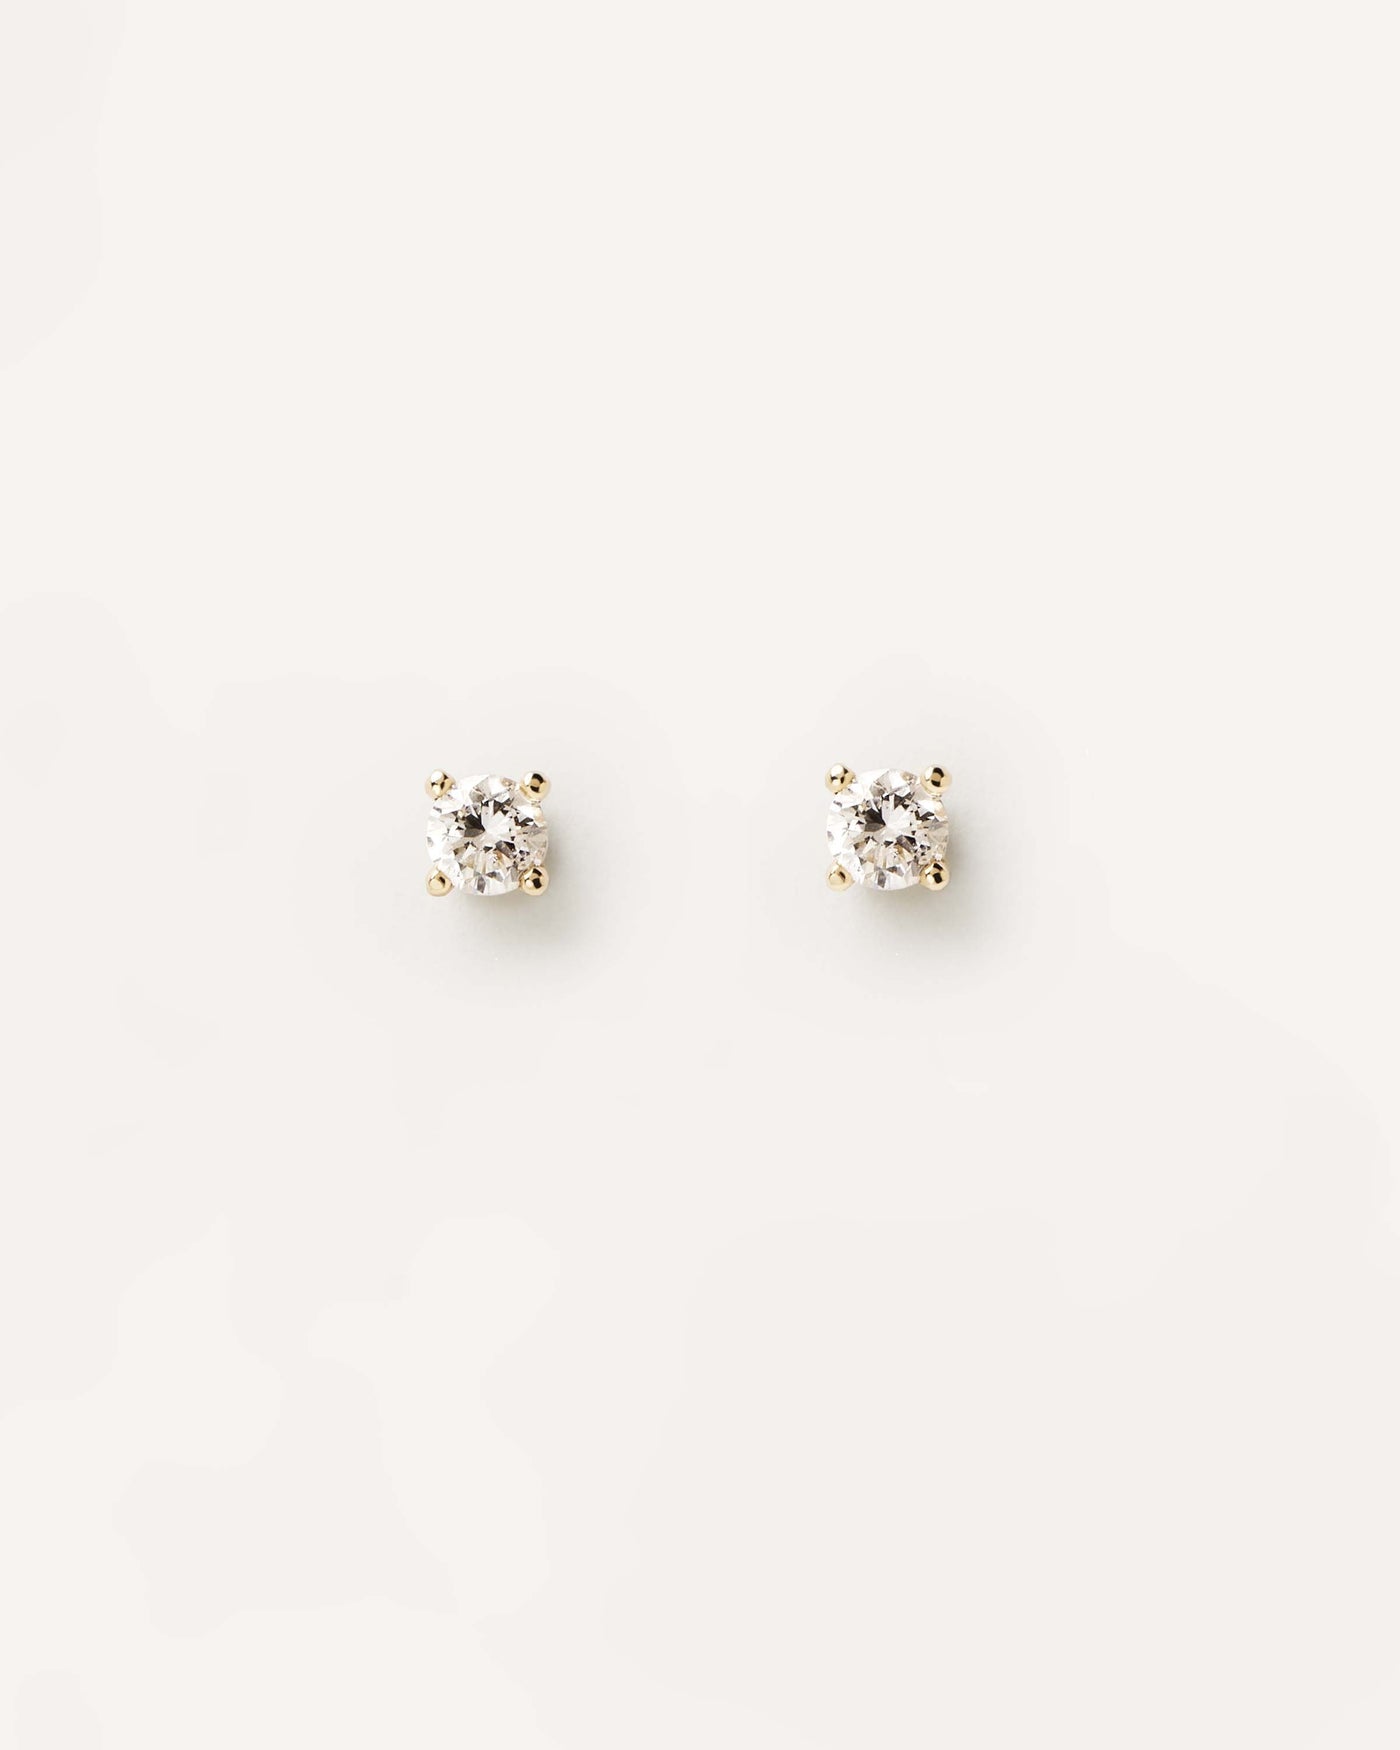 2023 Selection | Diamonds and Gold Solitaire Studs. 18K yellow gold pin earrings with lab-grown solitary diamond of 0.10 carat each. Get the latest arrival from PDPAOLA. Place your order safely and get this Best Seller. Free Shipping.